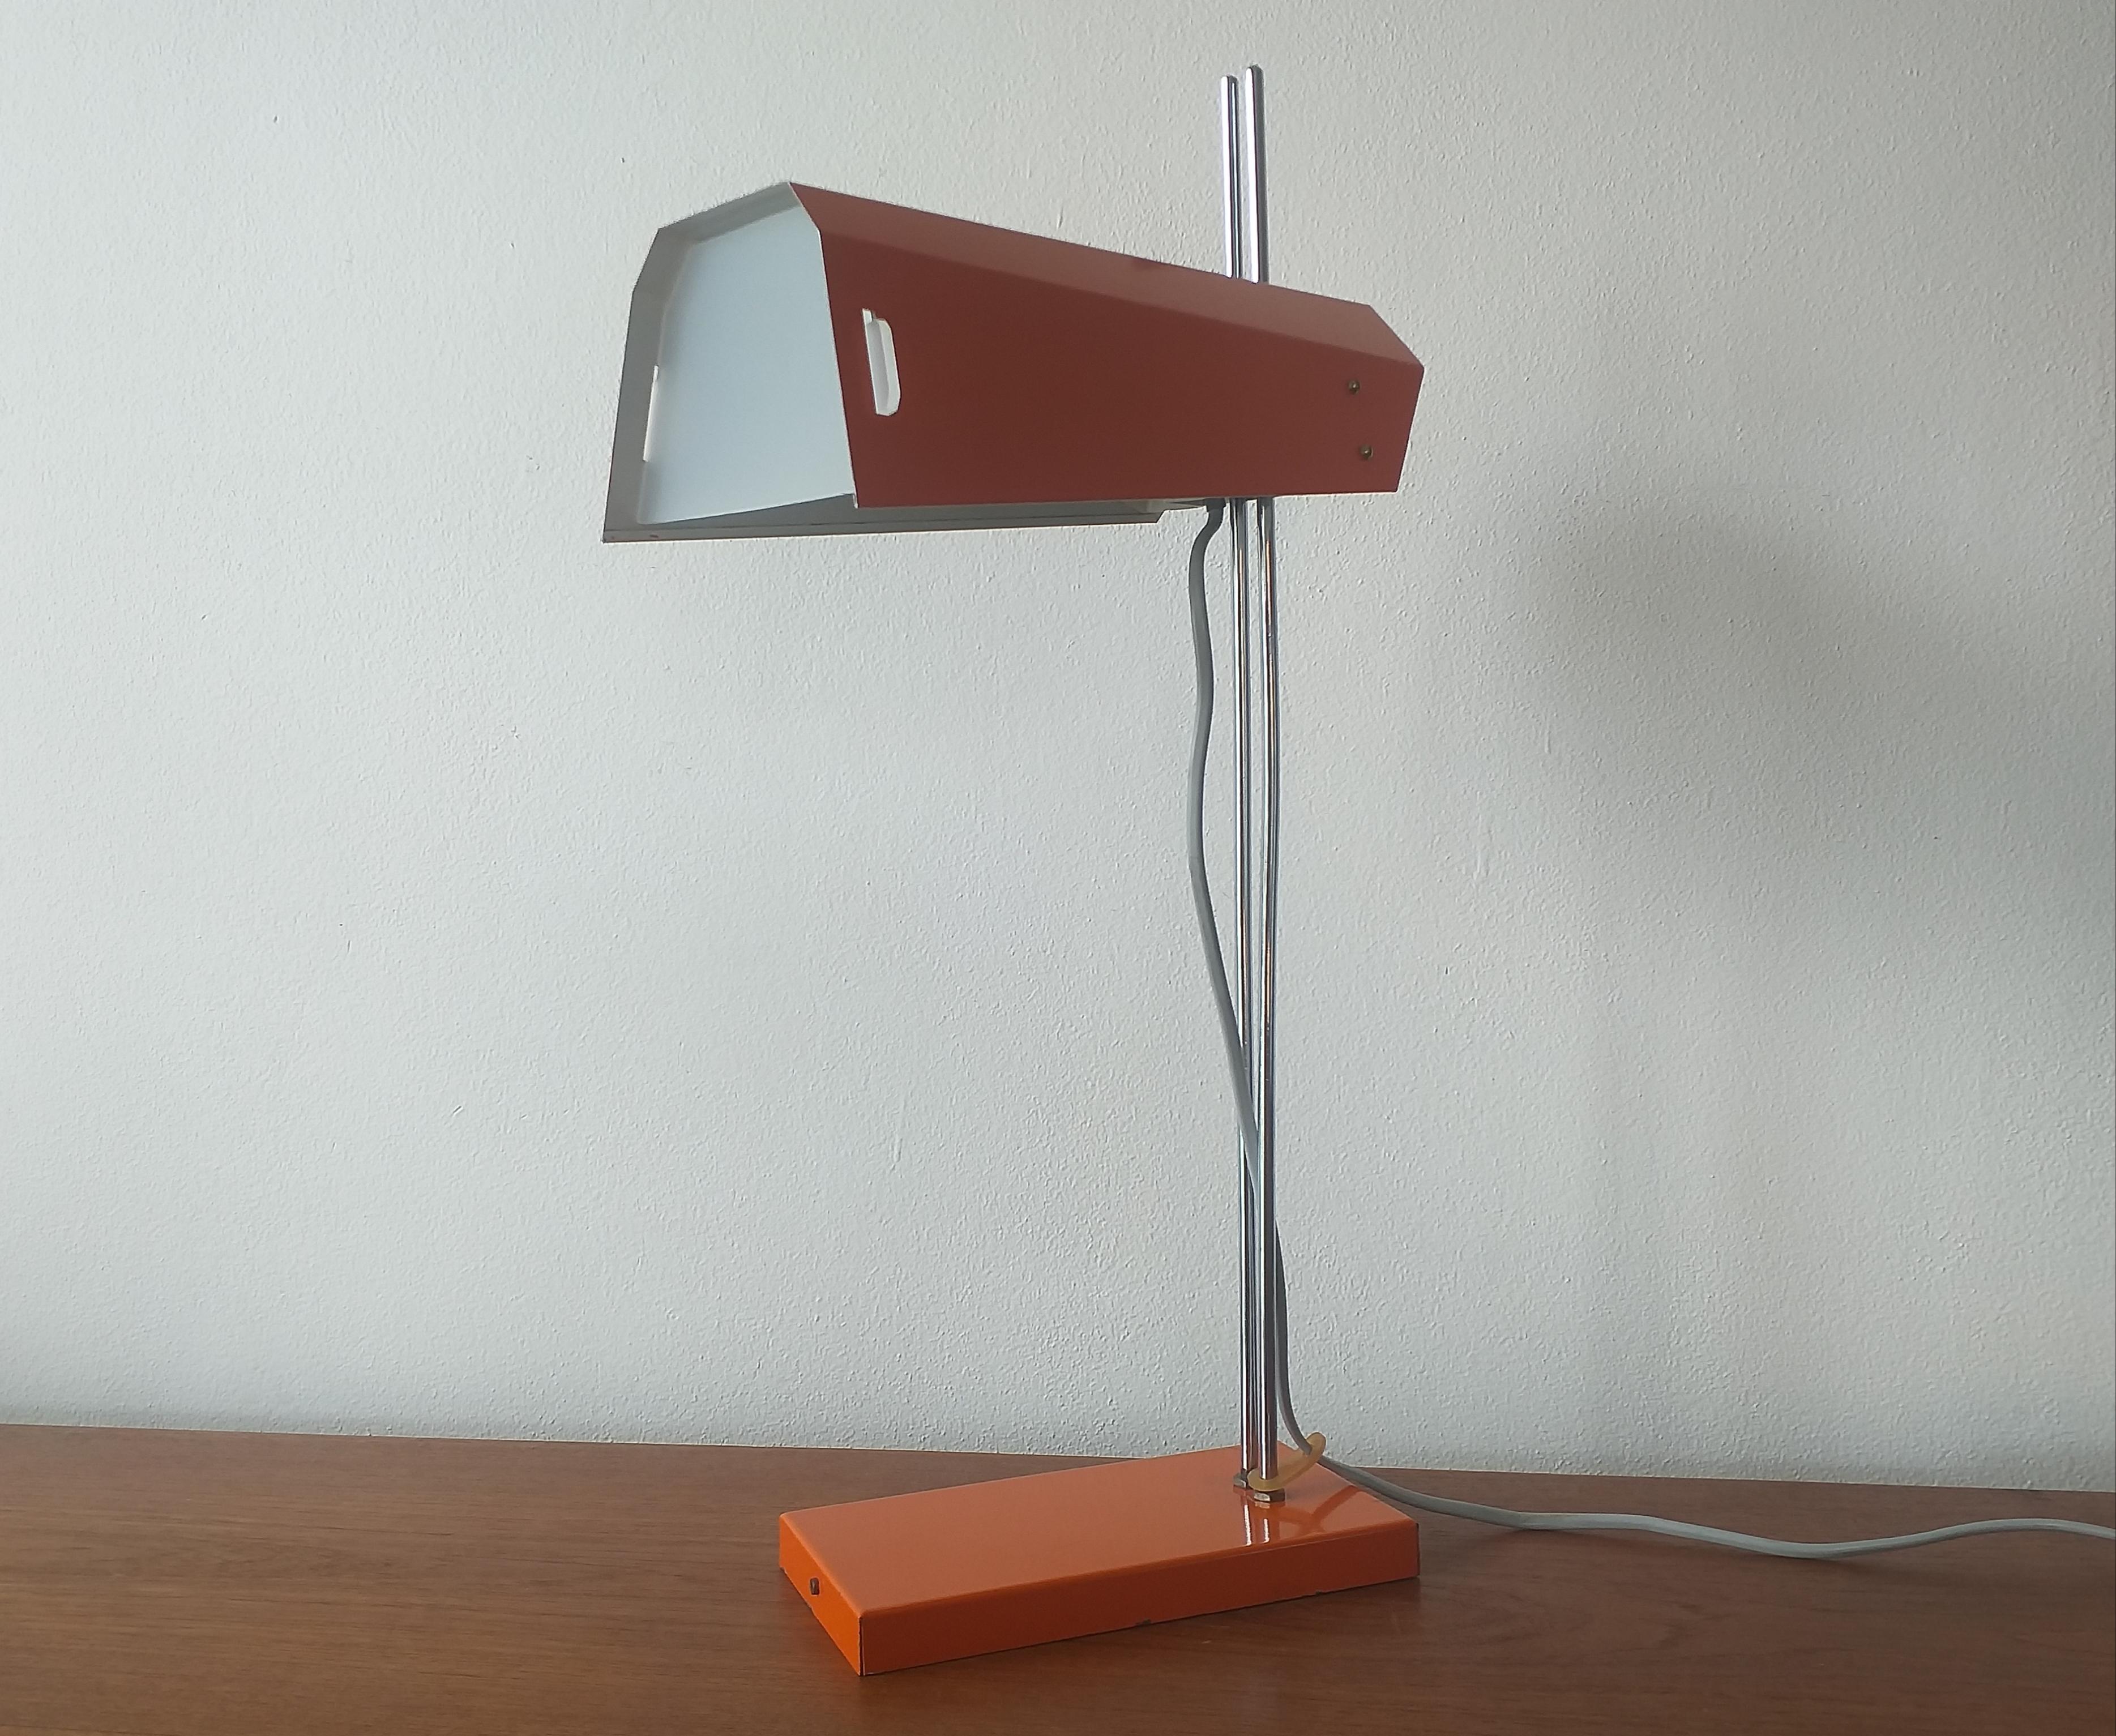 Midcentury Table Lamp Lidokov Designed by Josef Hurka, 1970s For Sale 3